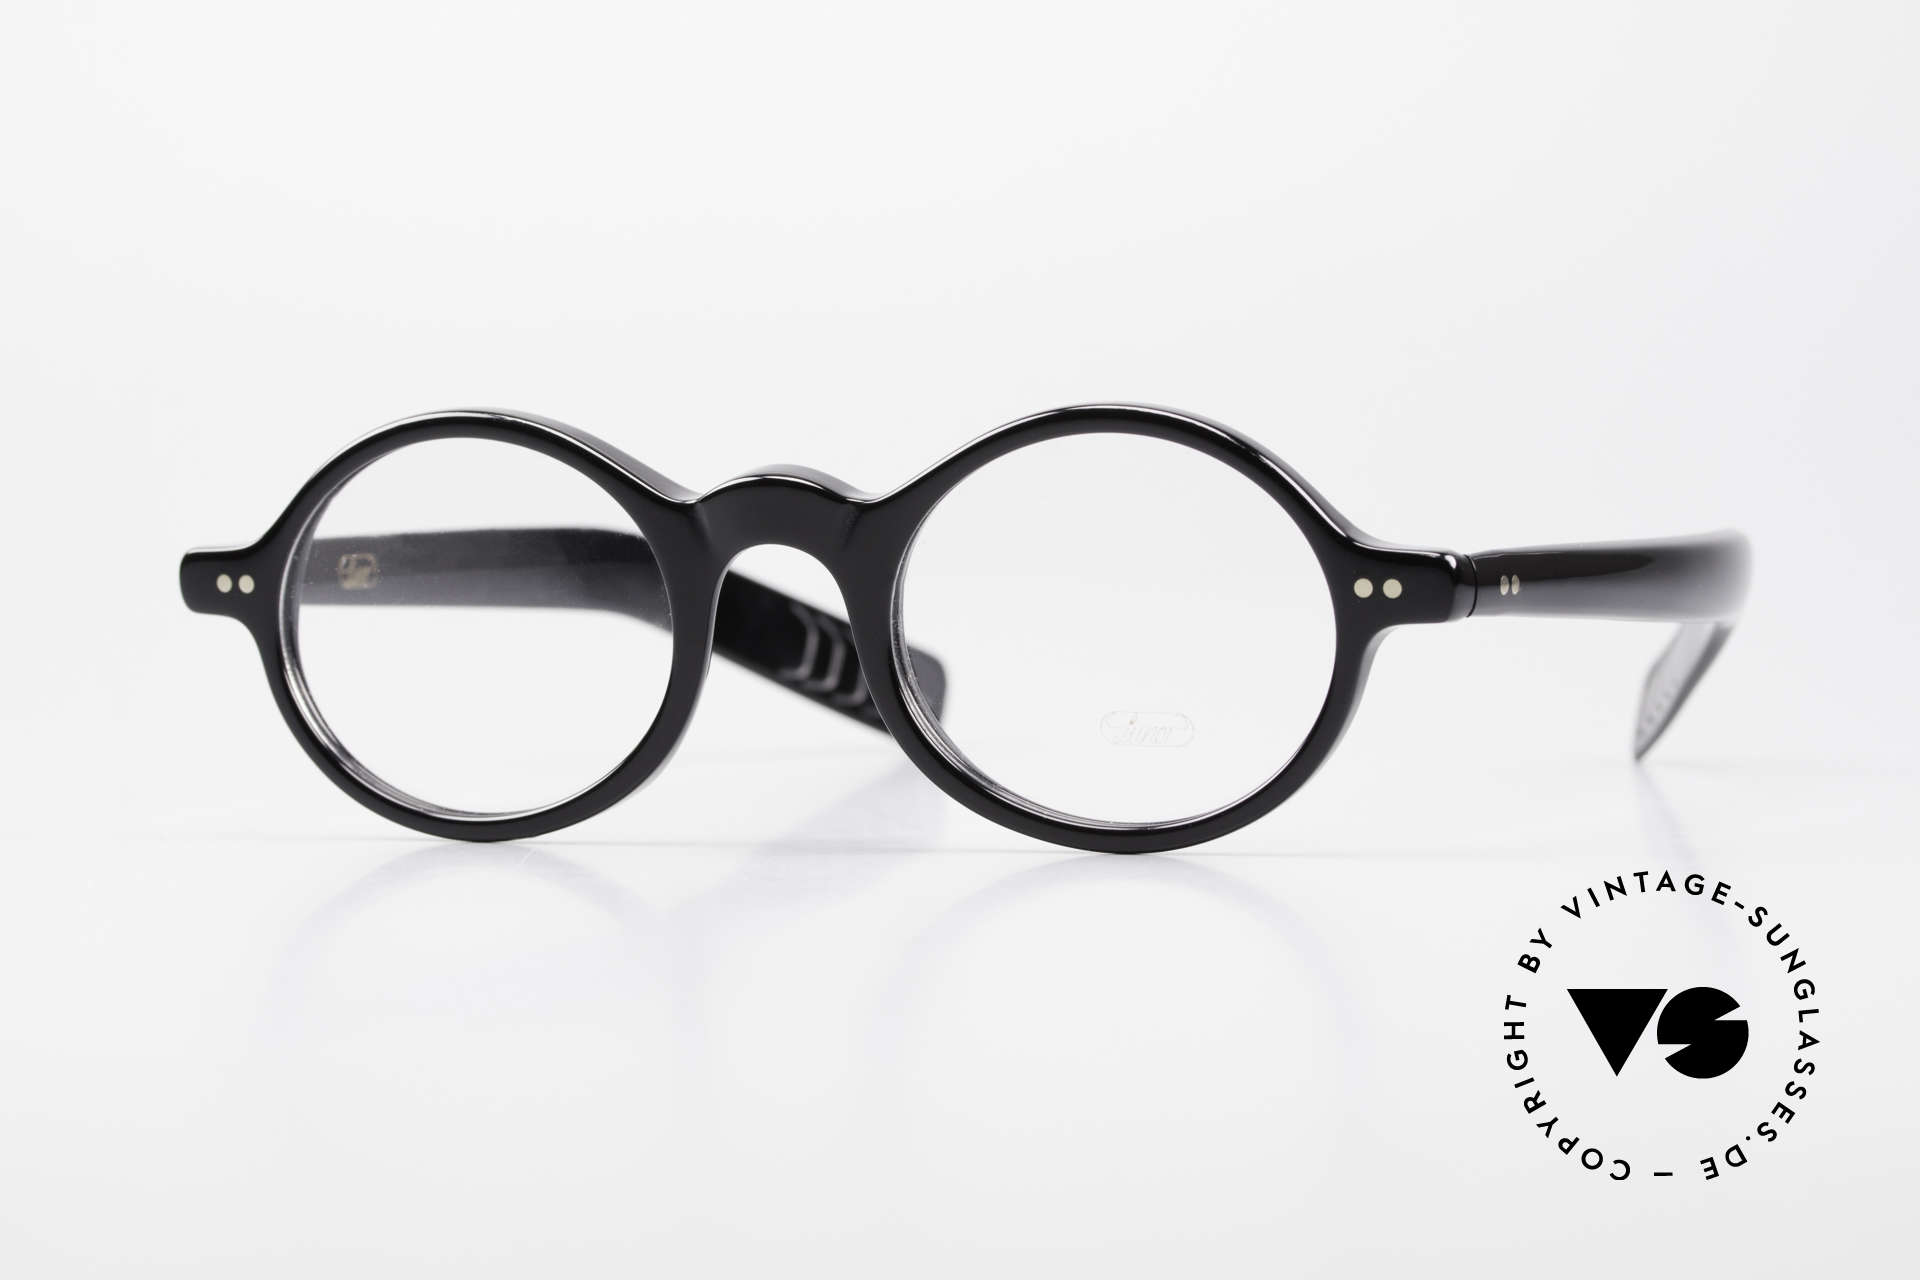 Lunor A52 Oval Eyeglasses Black Acetate, LUNOR glasses, model 52 from the Acetate collection, Made for Men and Women